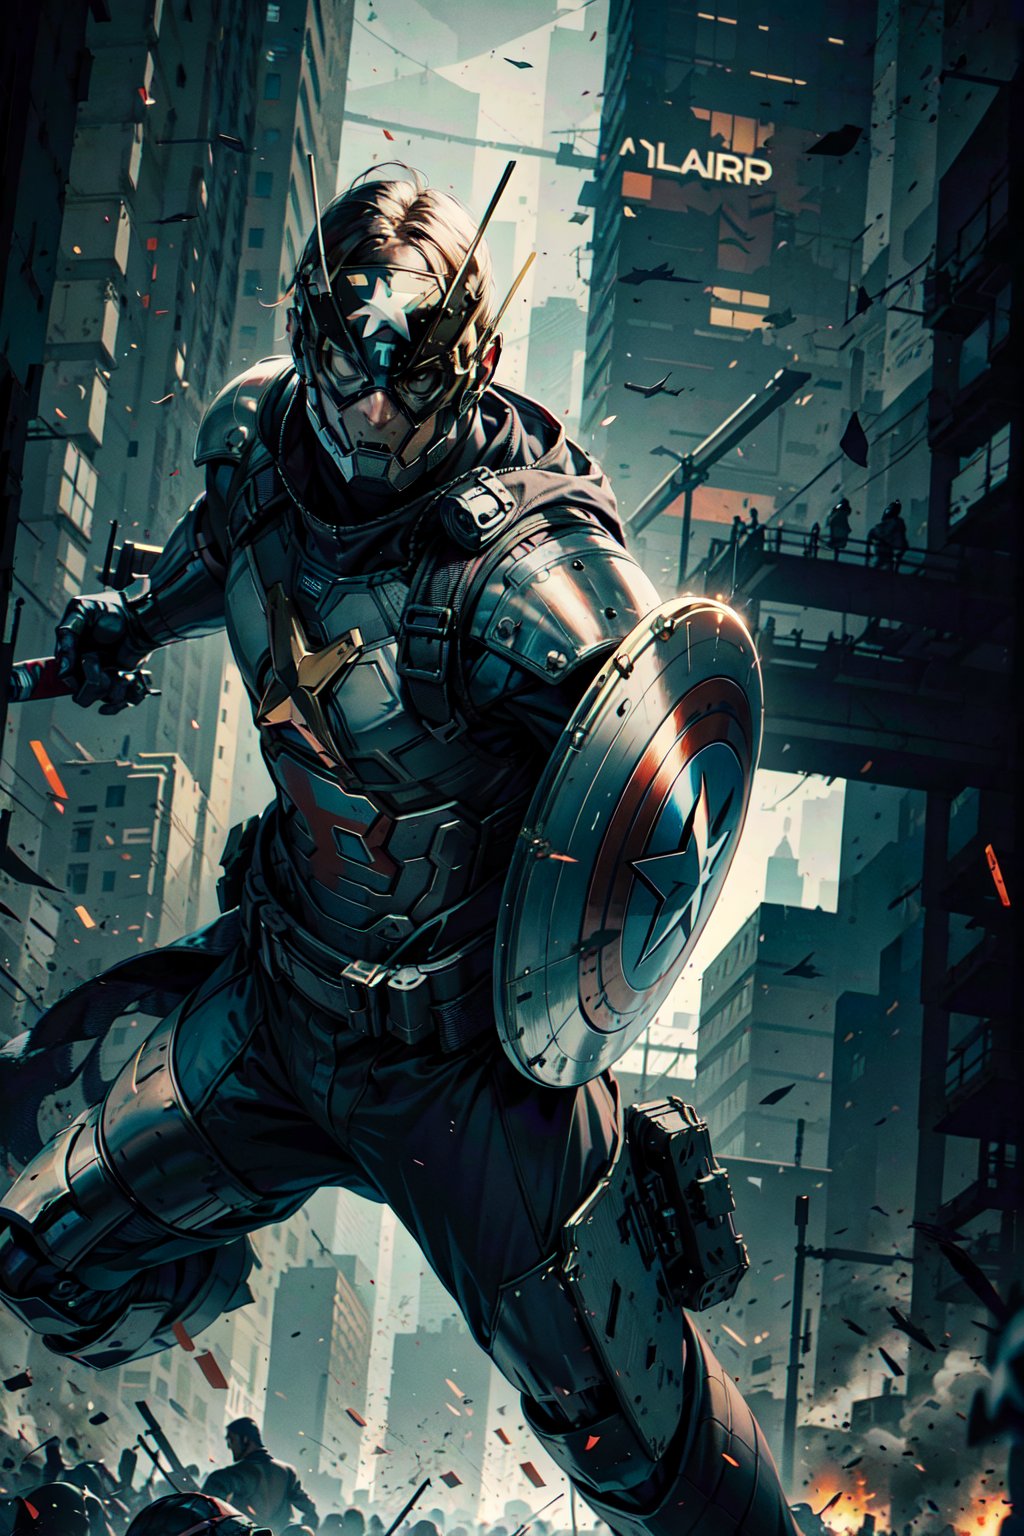 Captain America, cyberpunk, armour suit, mask on, holding shield, holding spear, battle pose